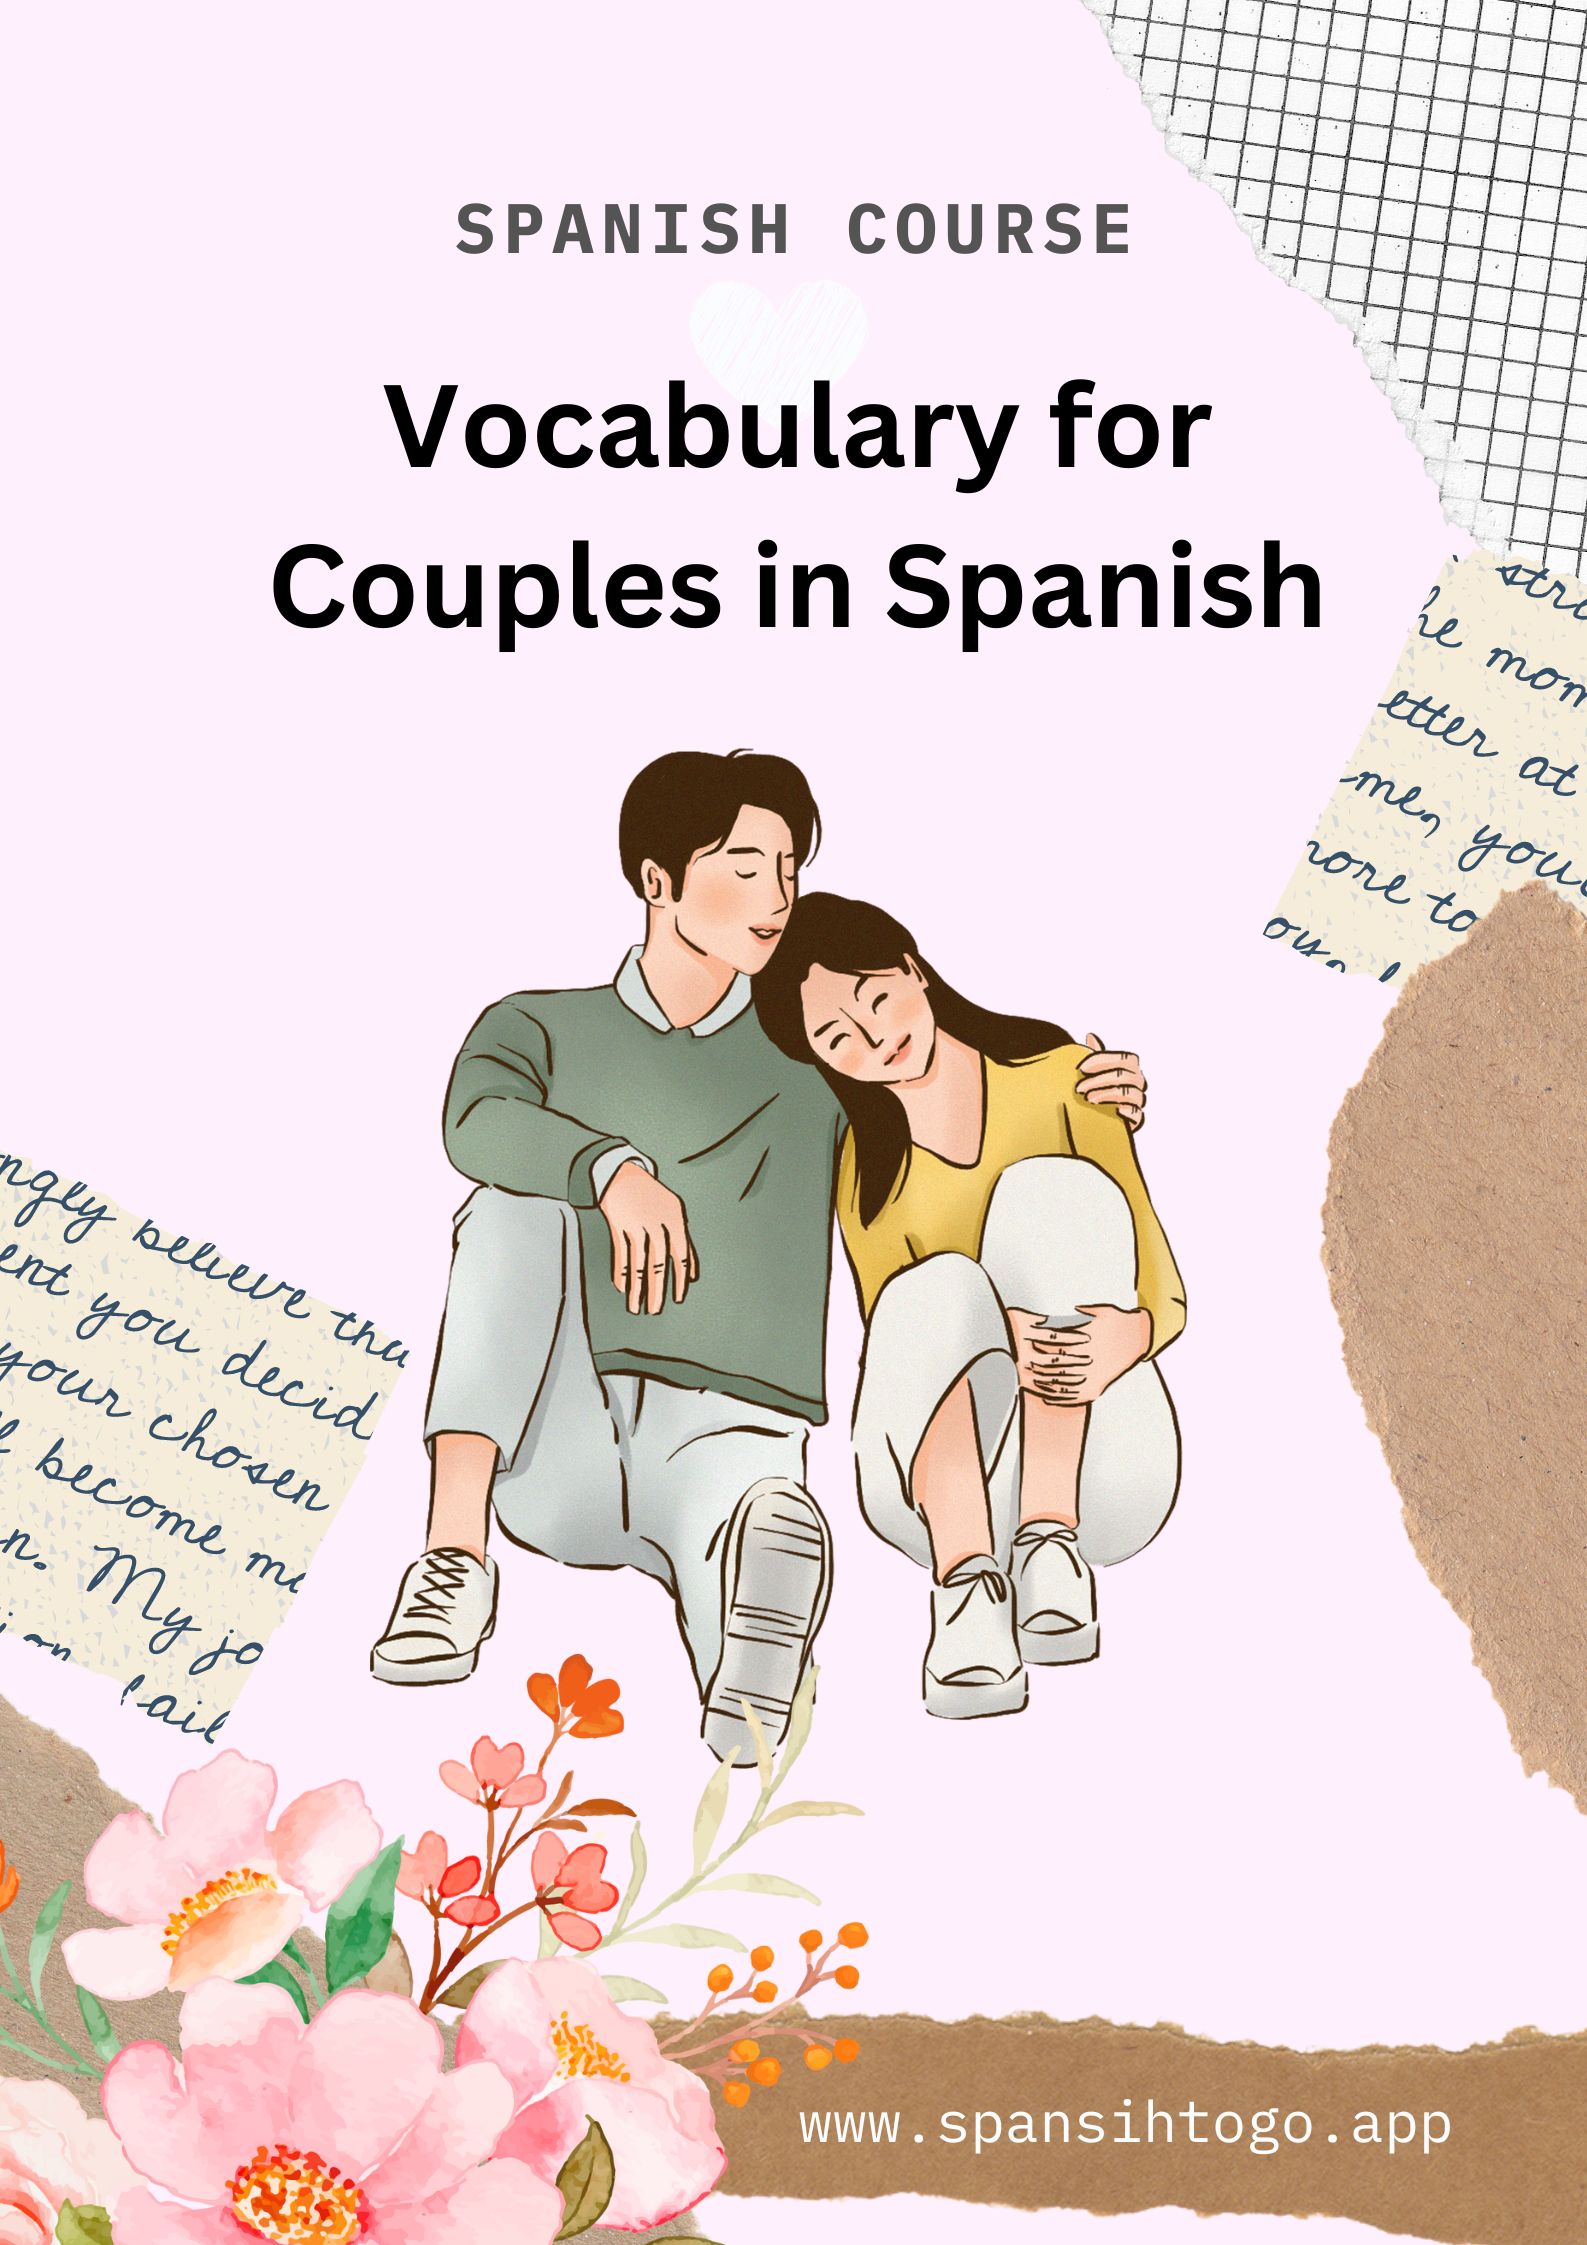 Vocabulary for Couples in Spanish